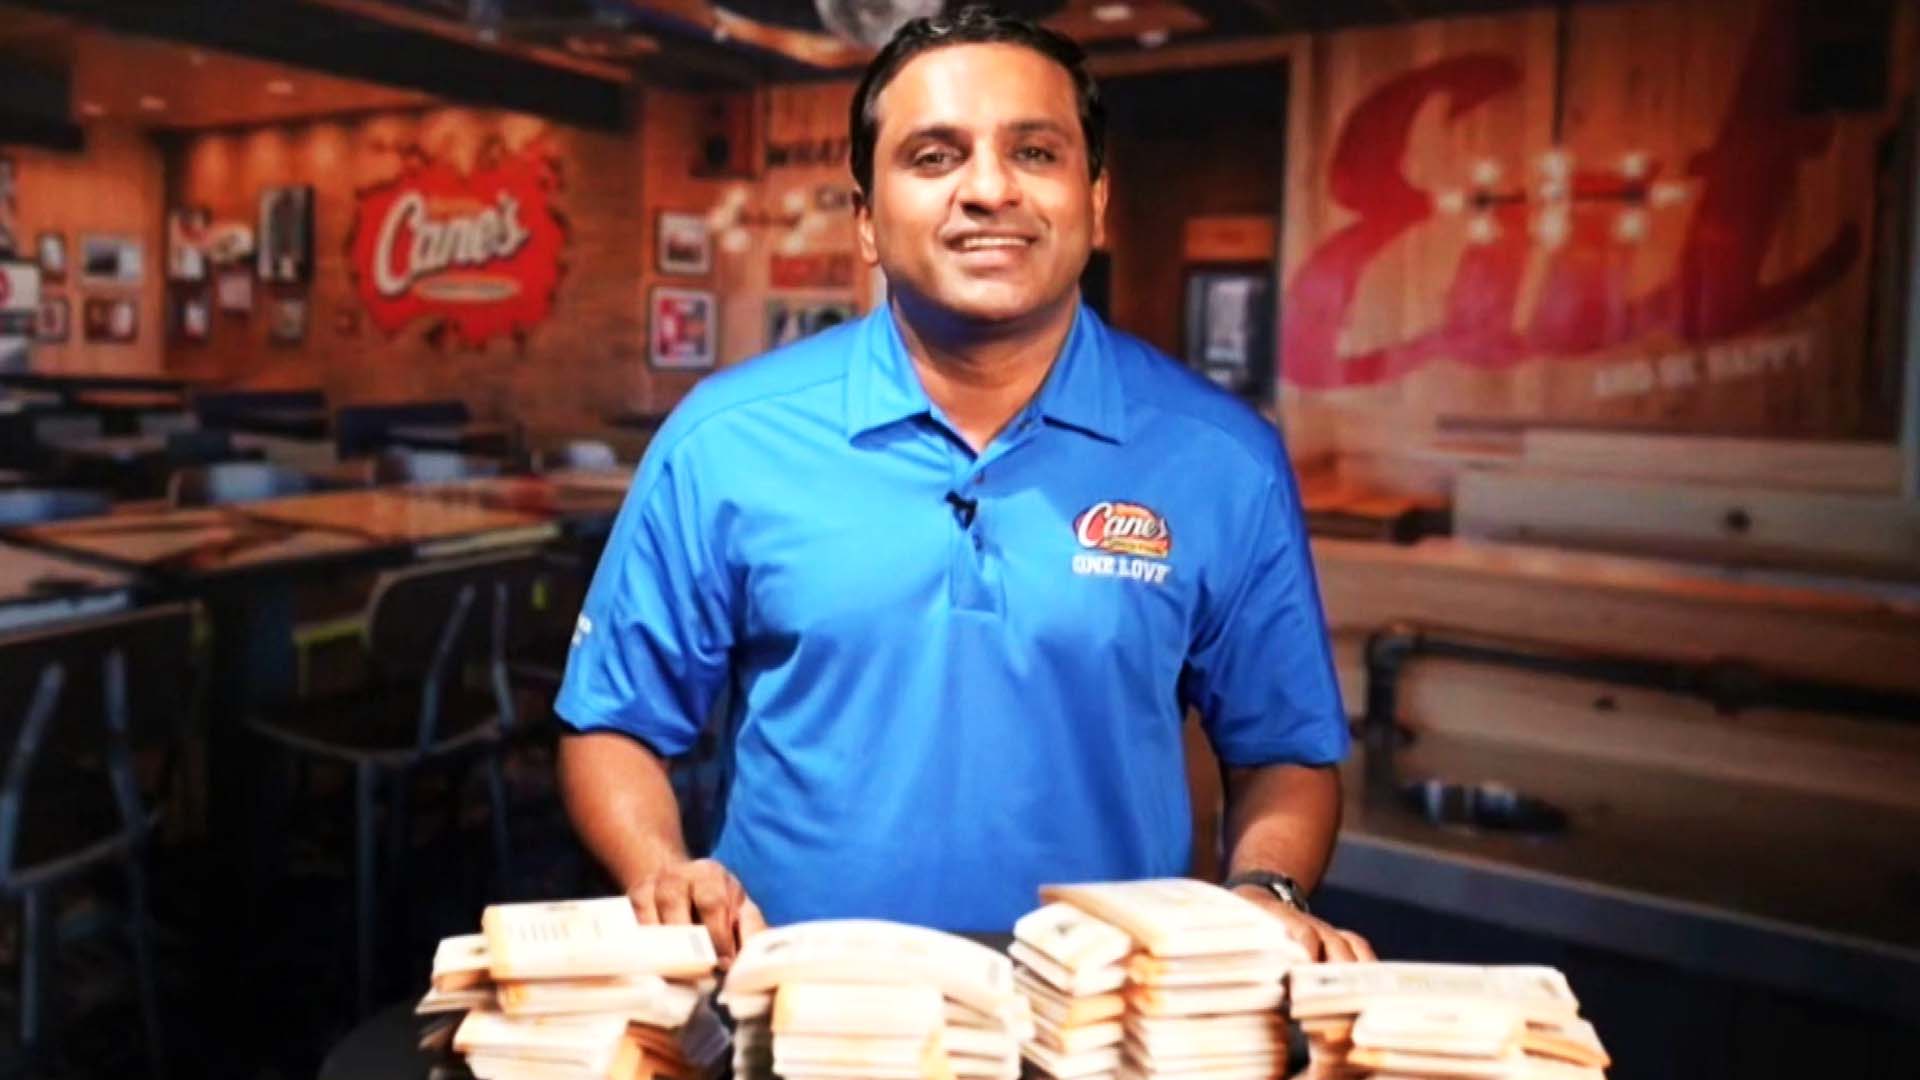 Raising Cane's co-CEO on NYC expansion: Our goal is $10 billion in